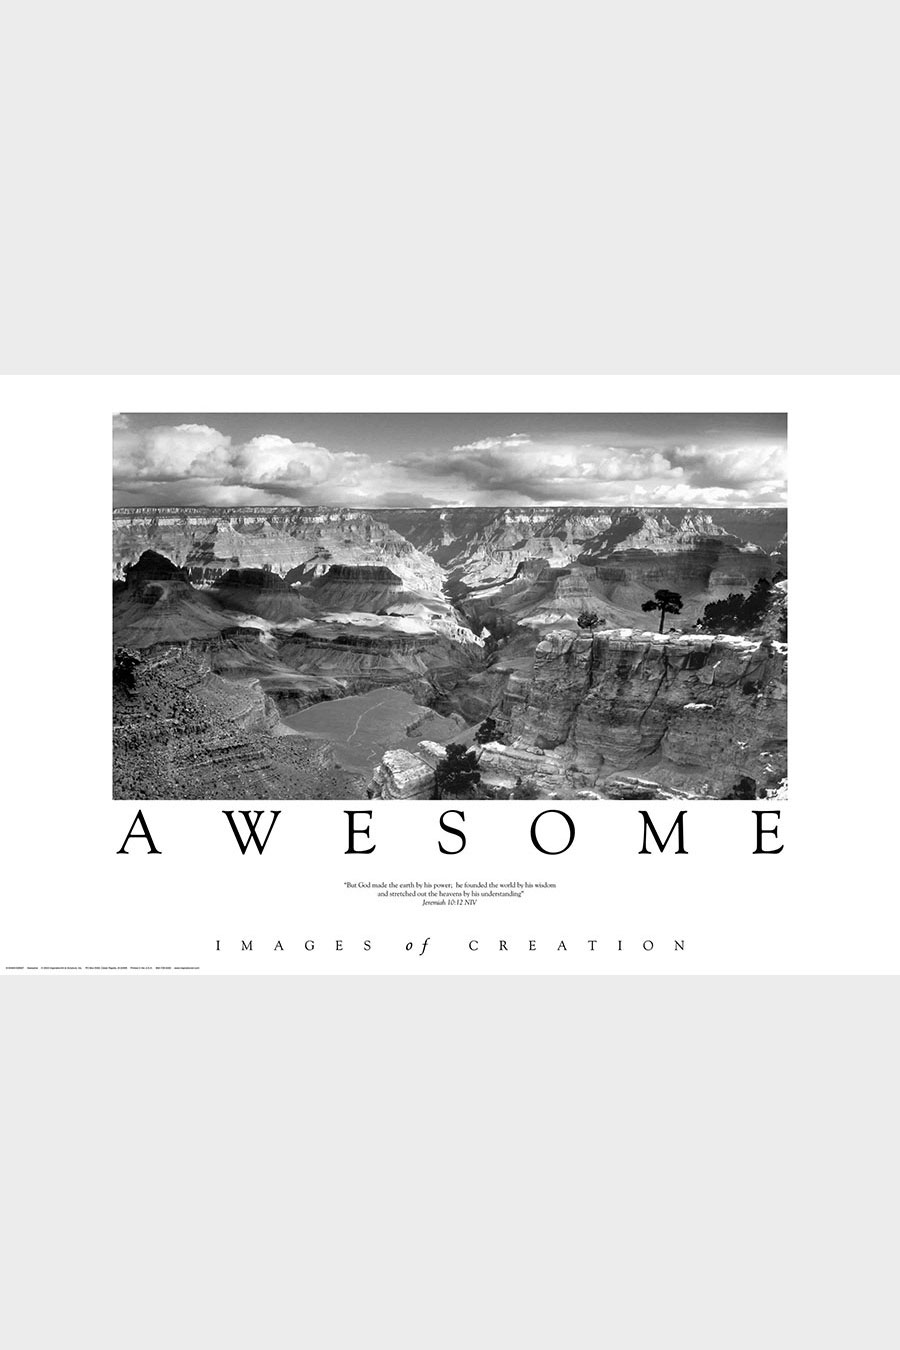 Awesome - Christian Poster showing Grand Canyon with Scripture